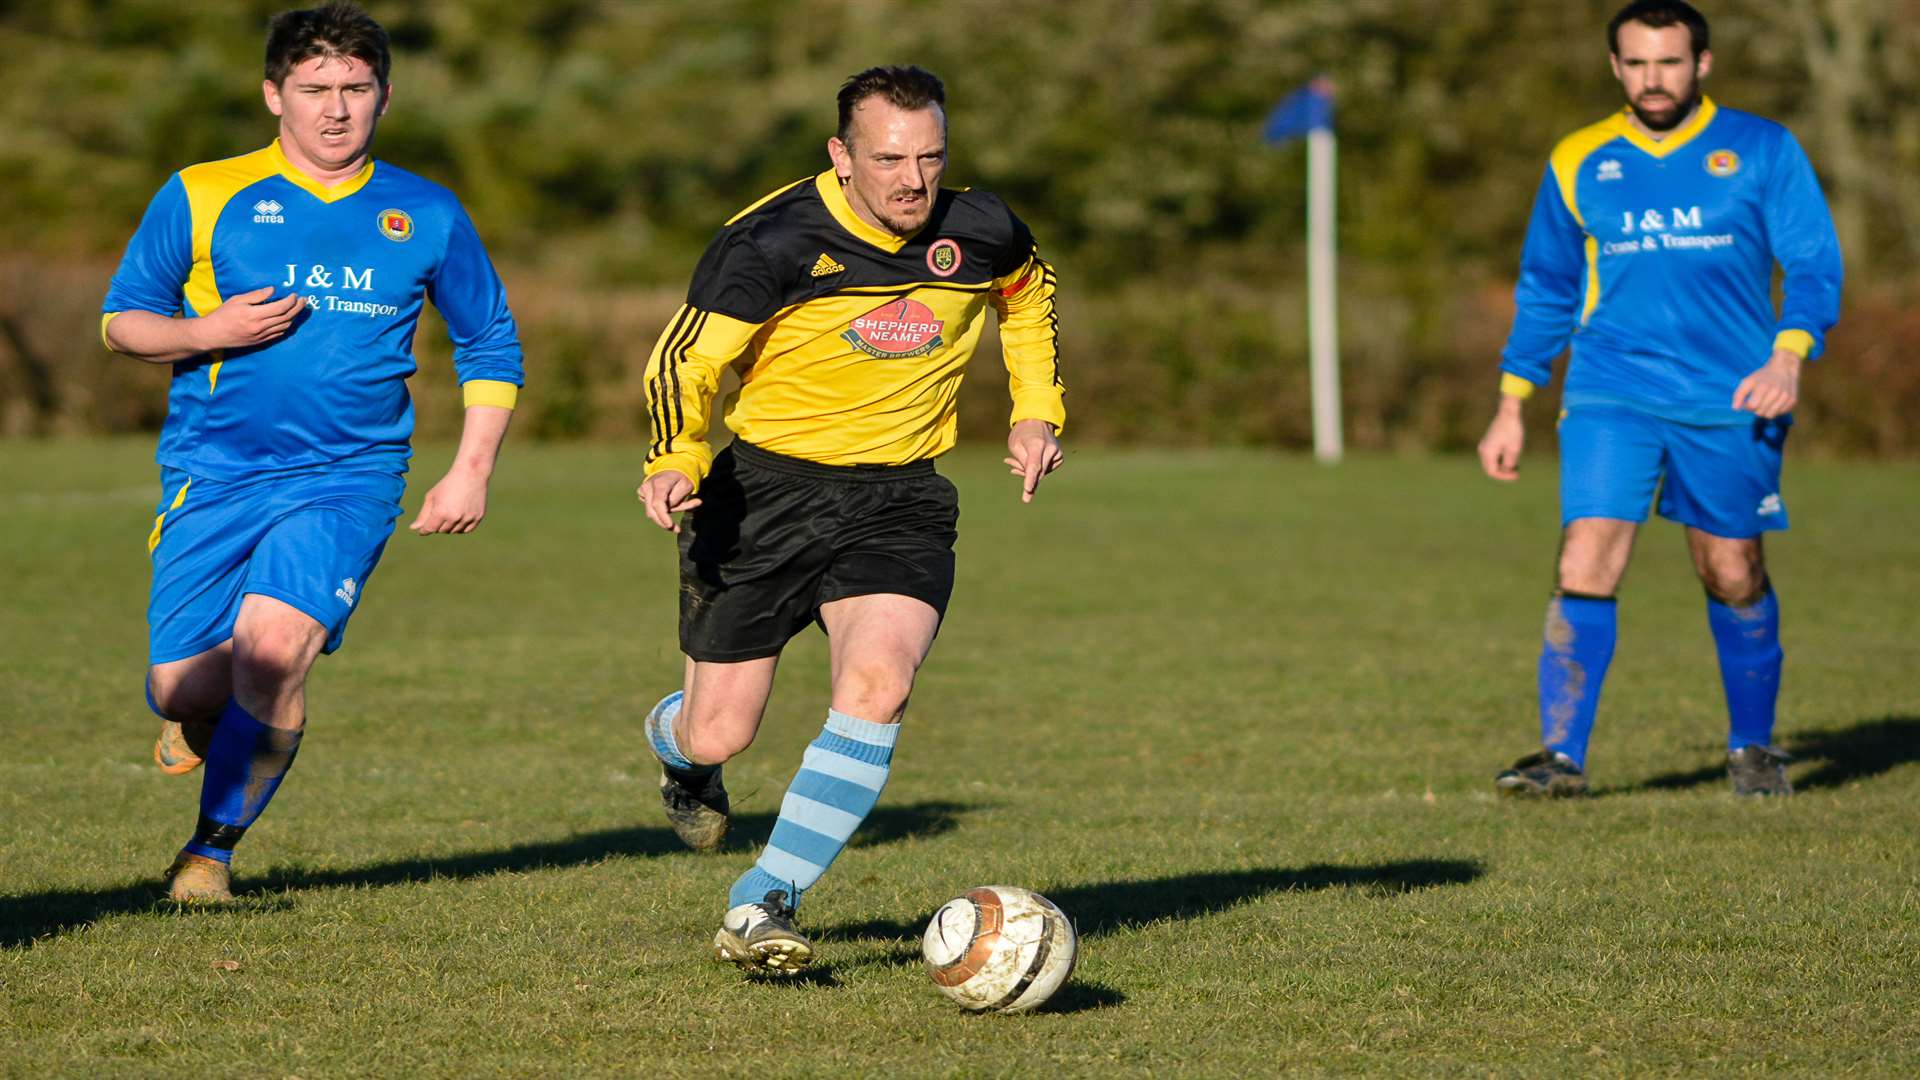 Andy in action for Aldington in the Saturday league. Pic by Alan Langley